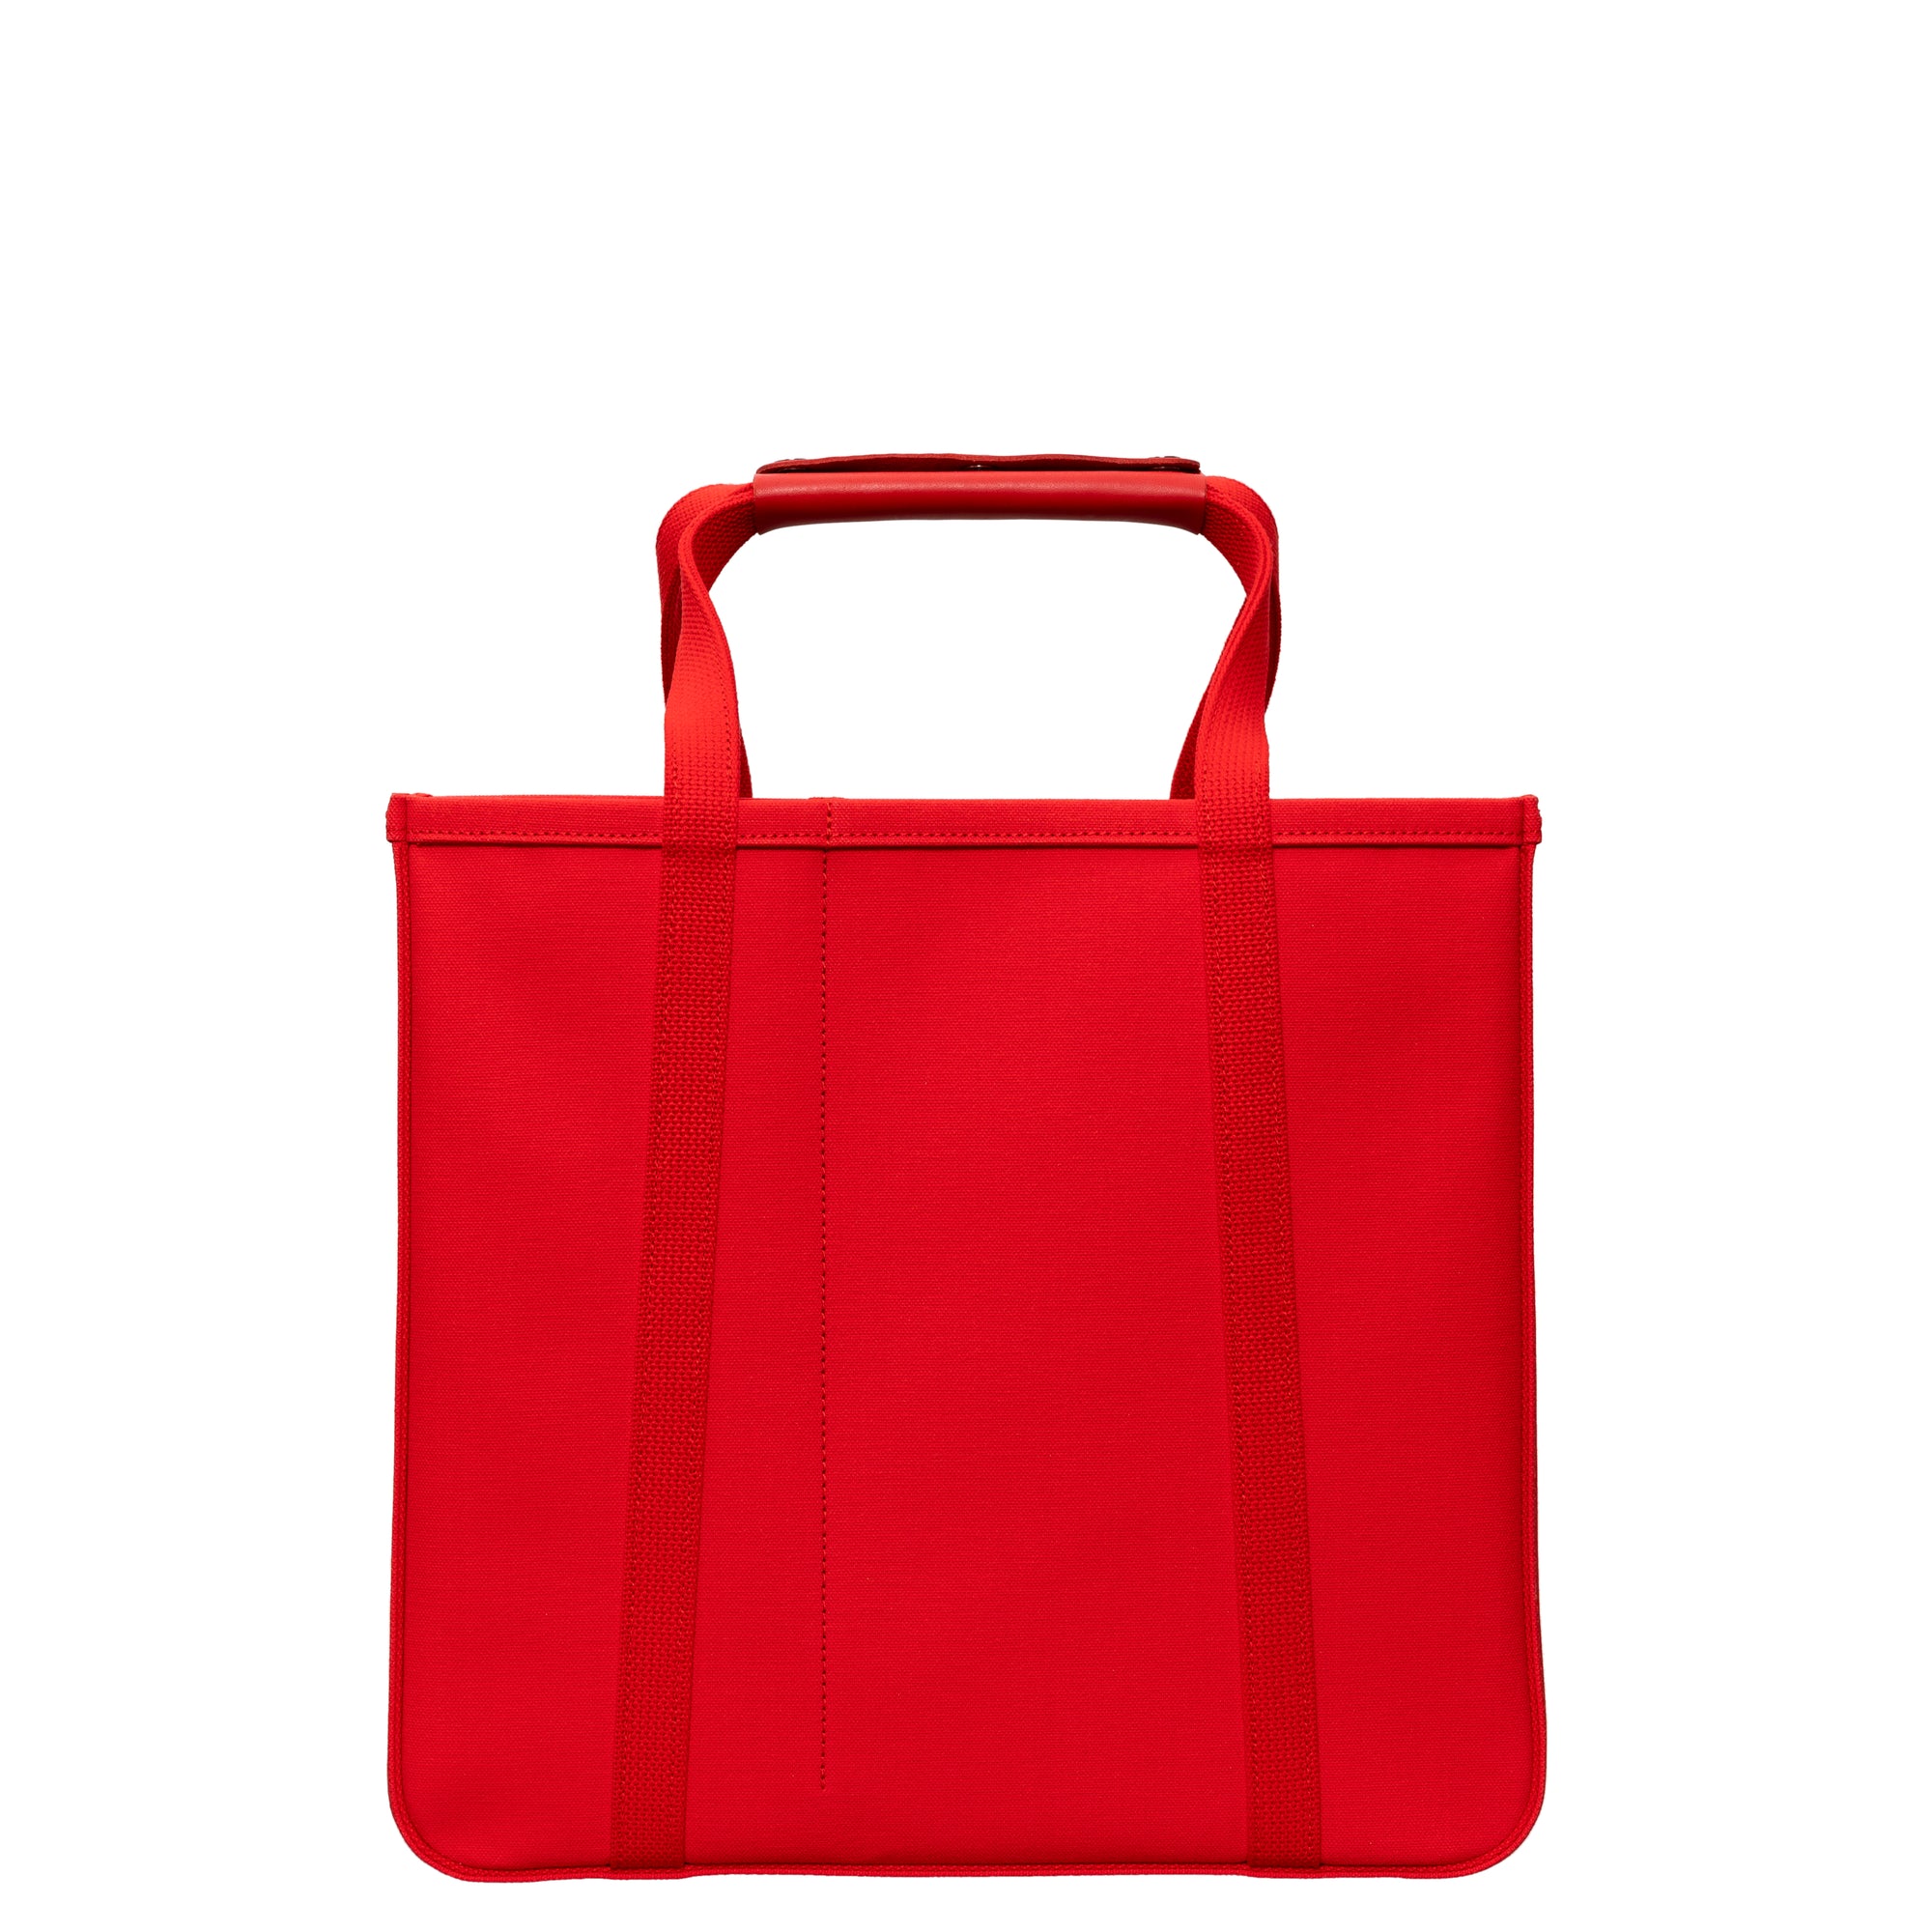 CHACOLI - 01 TOTE W400 X H380 X D180 - (RED) view 1